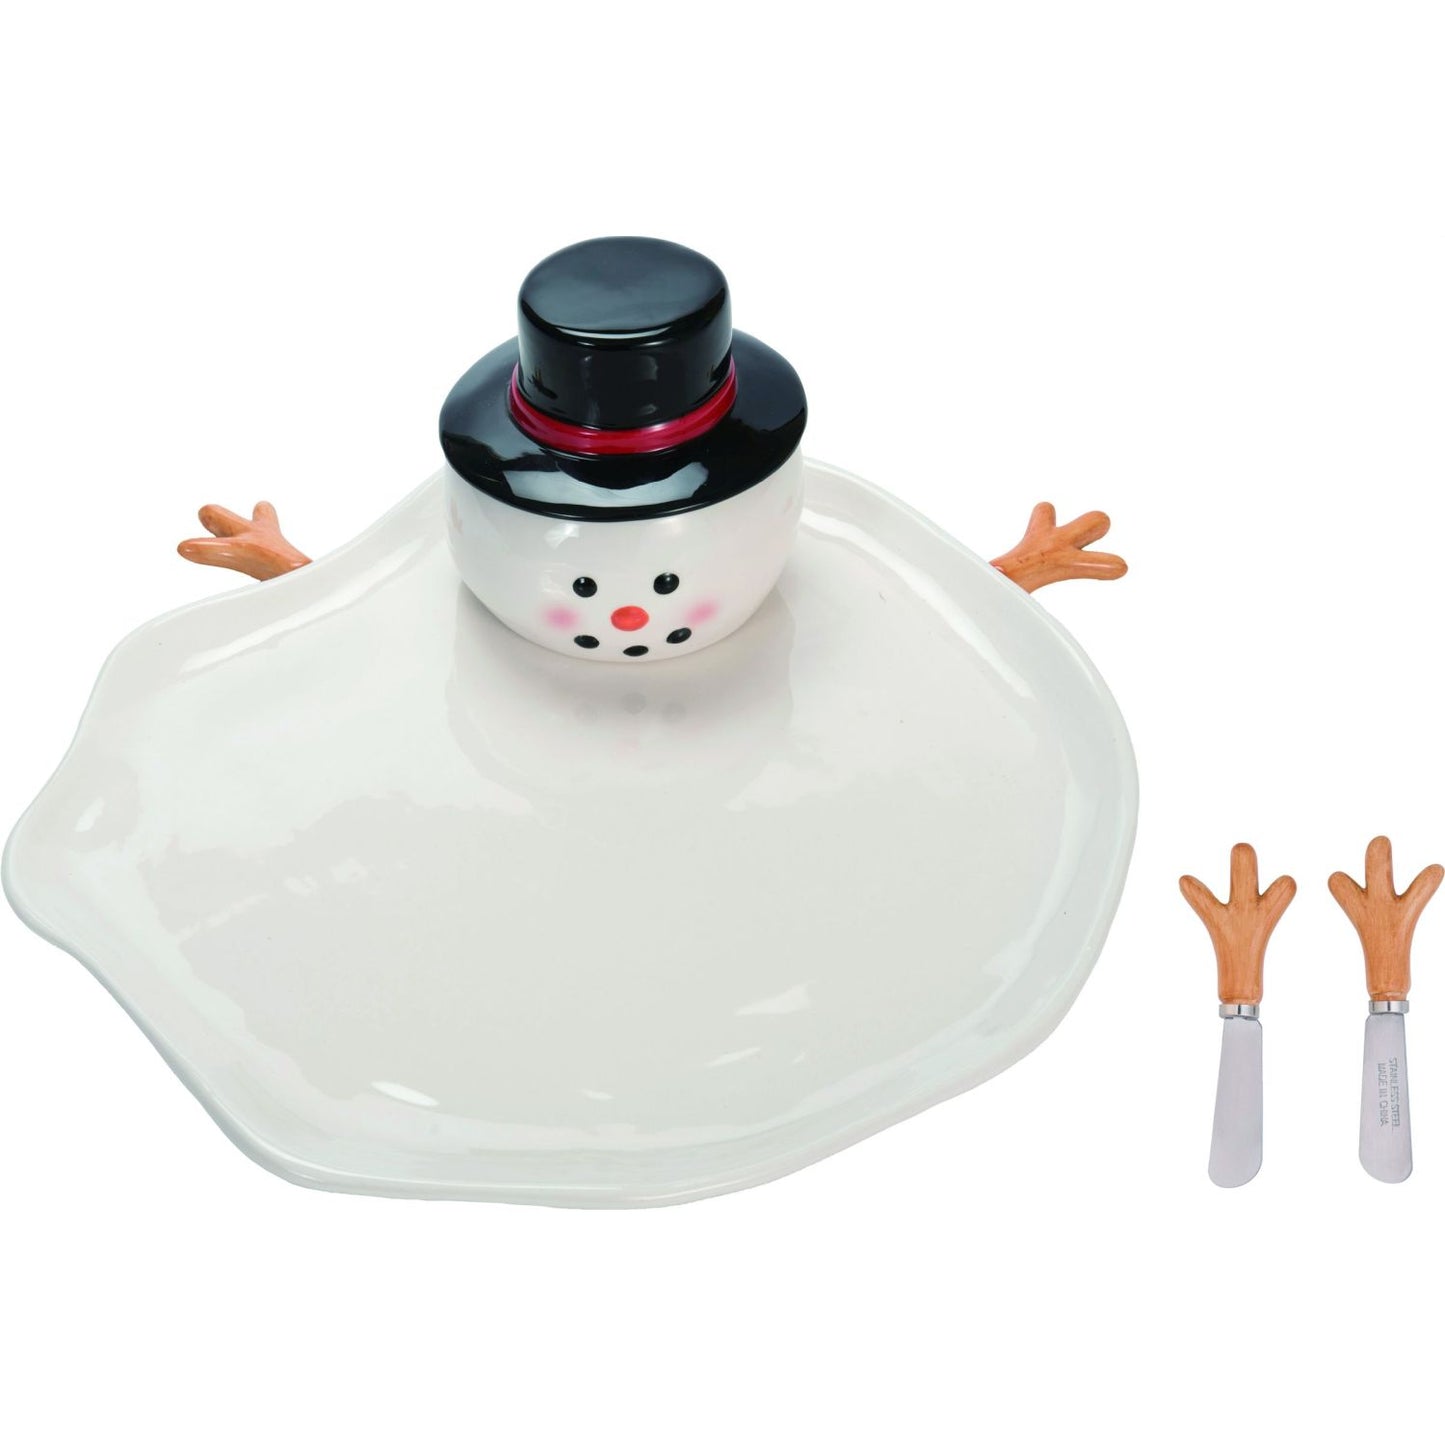 Transpac Dolomite Melted Snowman Plate With Spreader Set Of 4